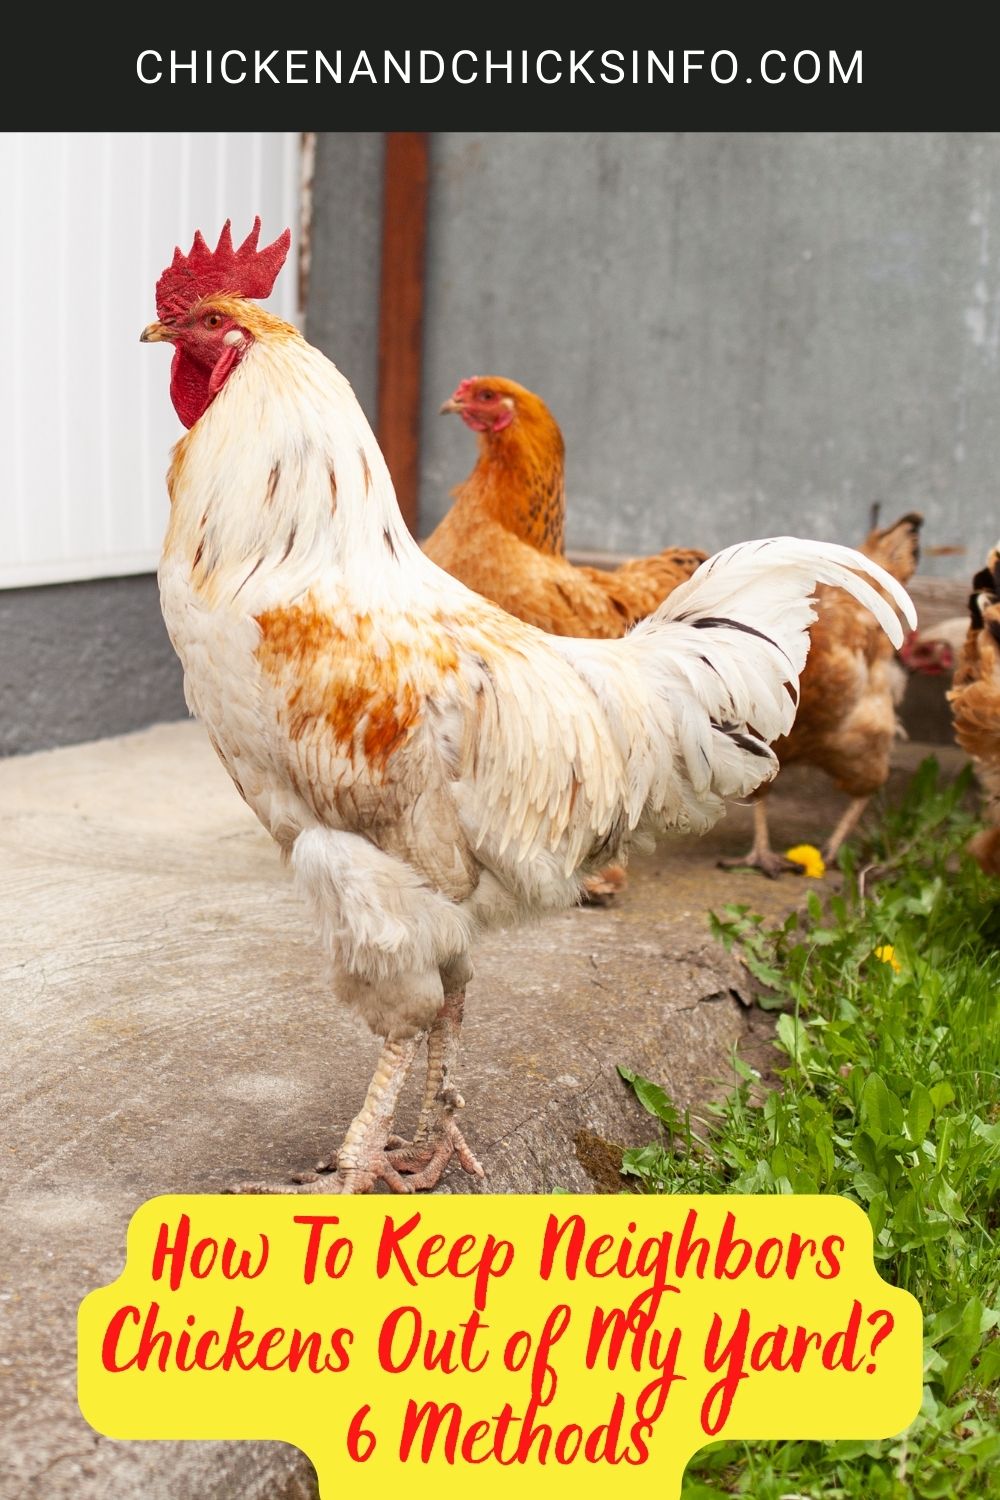 How To Keep Neighbors Chickens Out of My Yard? 6 Methods poster.
